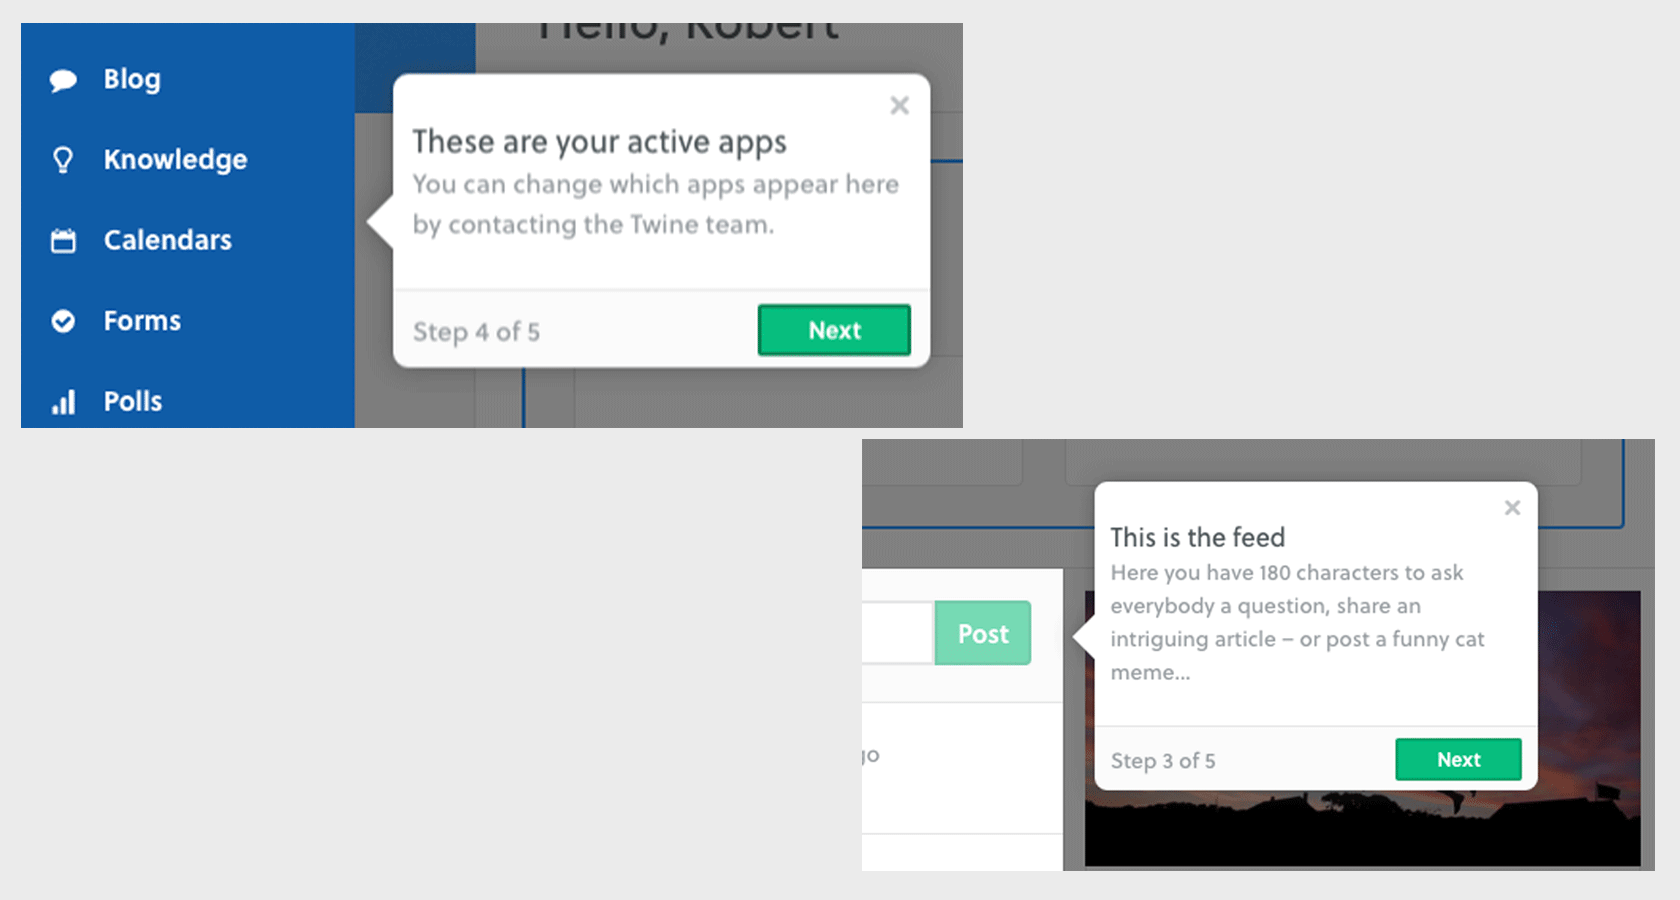 Tooltips are one of the common onboarding UX patterns